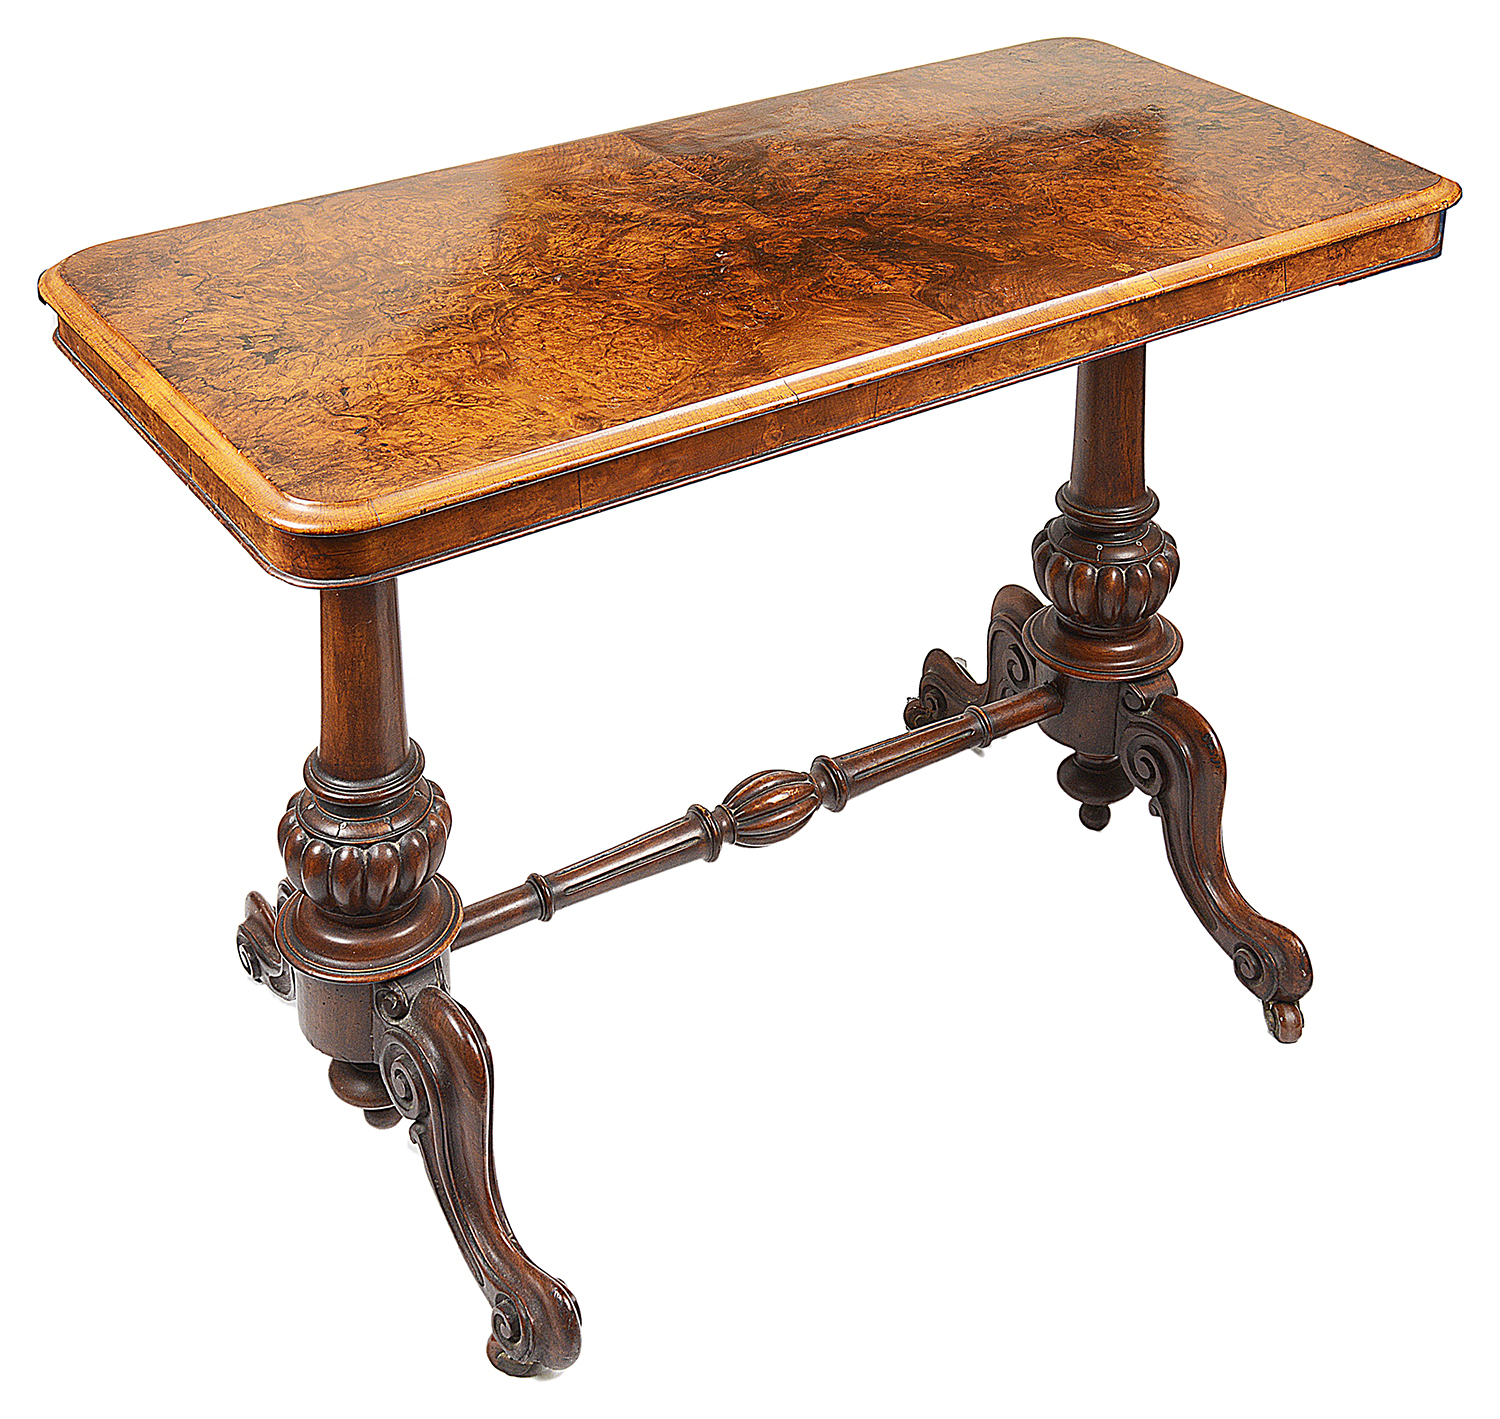 A Vict. burr walnut and mahogany side table